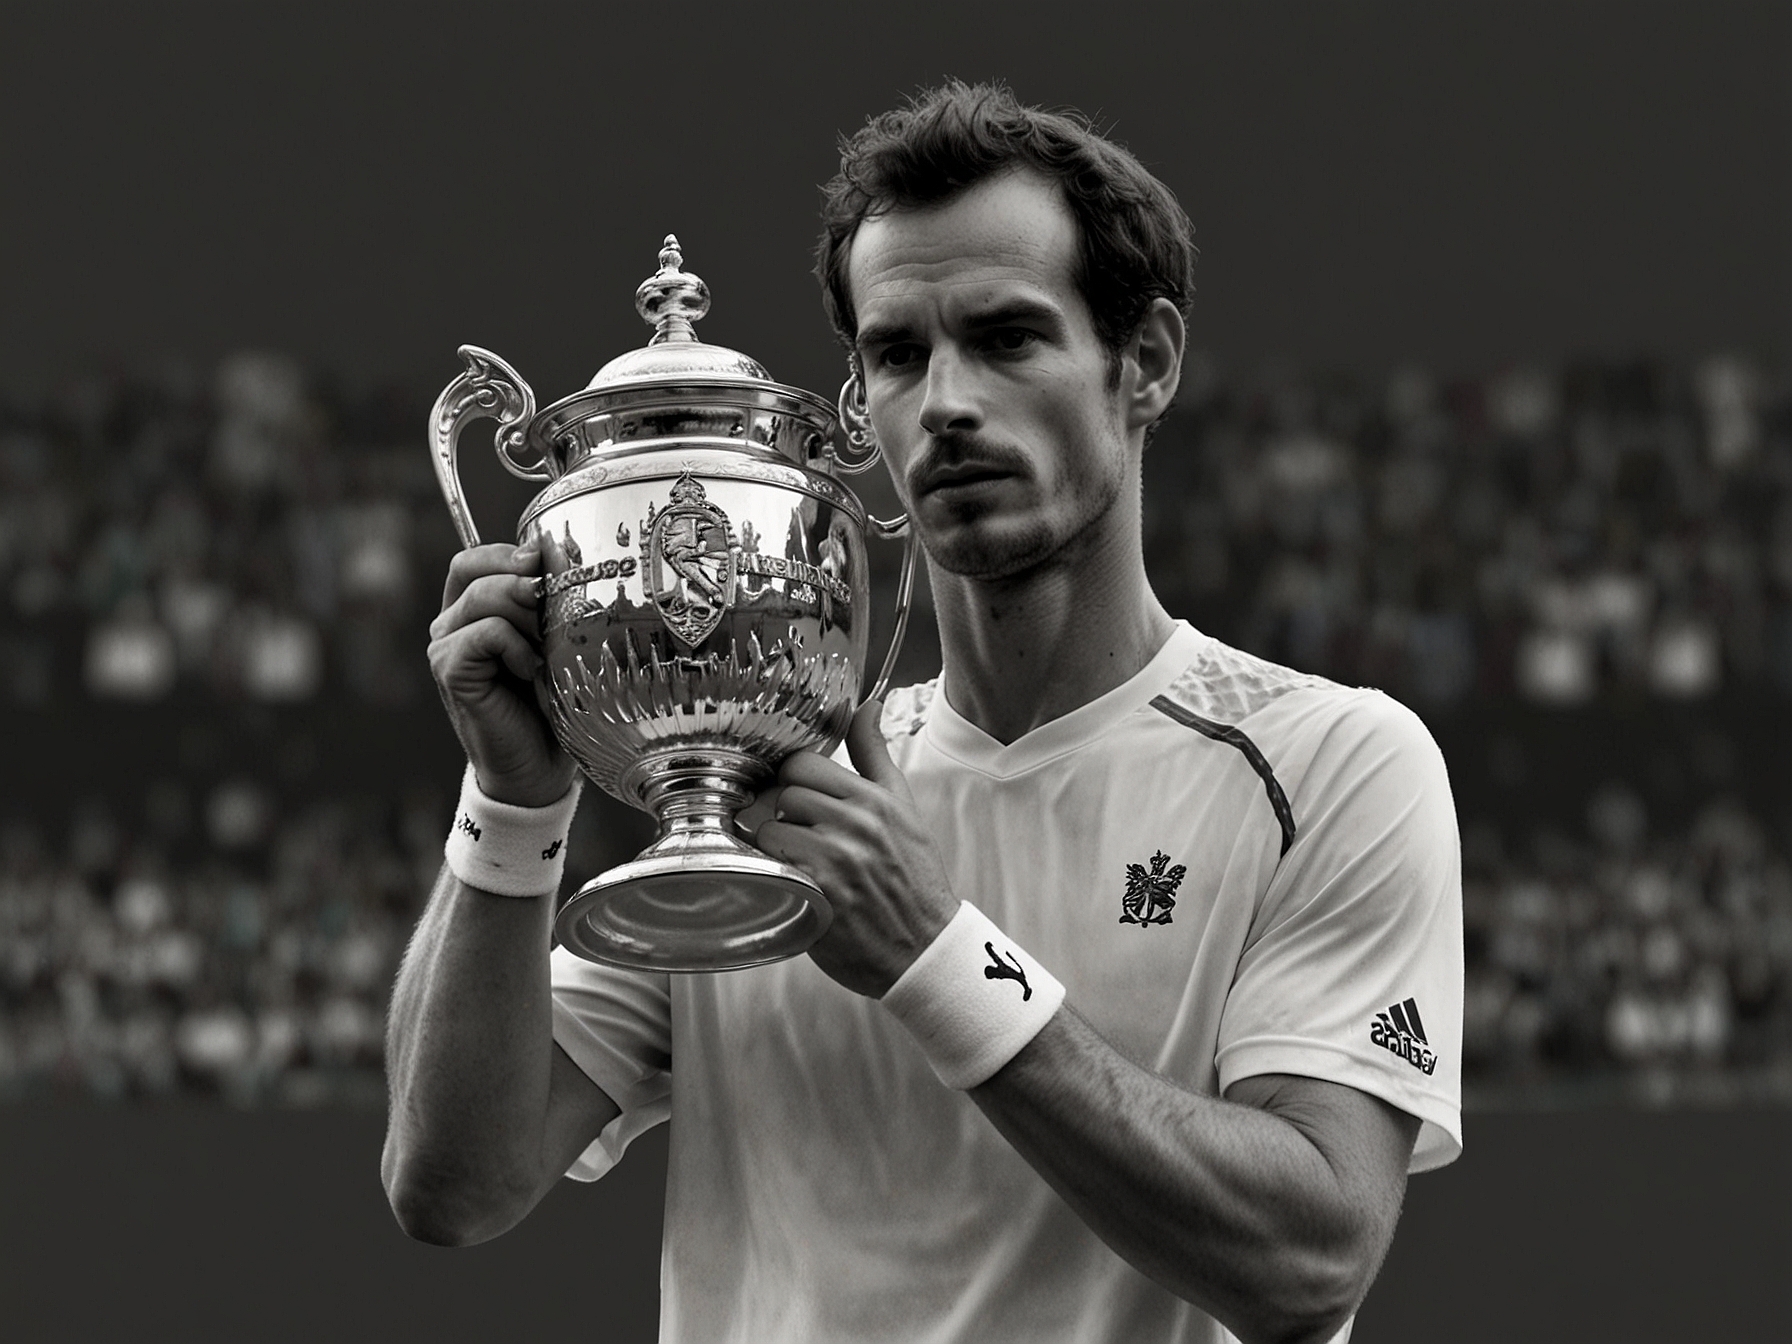 An emotional Andy Murray holding the Wimbledon trophy, highlighting the significance of the tournament in his career as he faces uncertainty about his future participation.